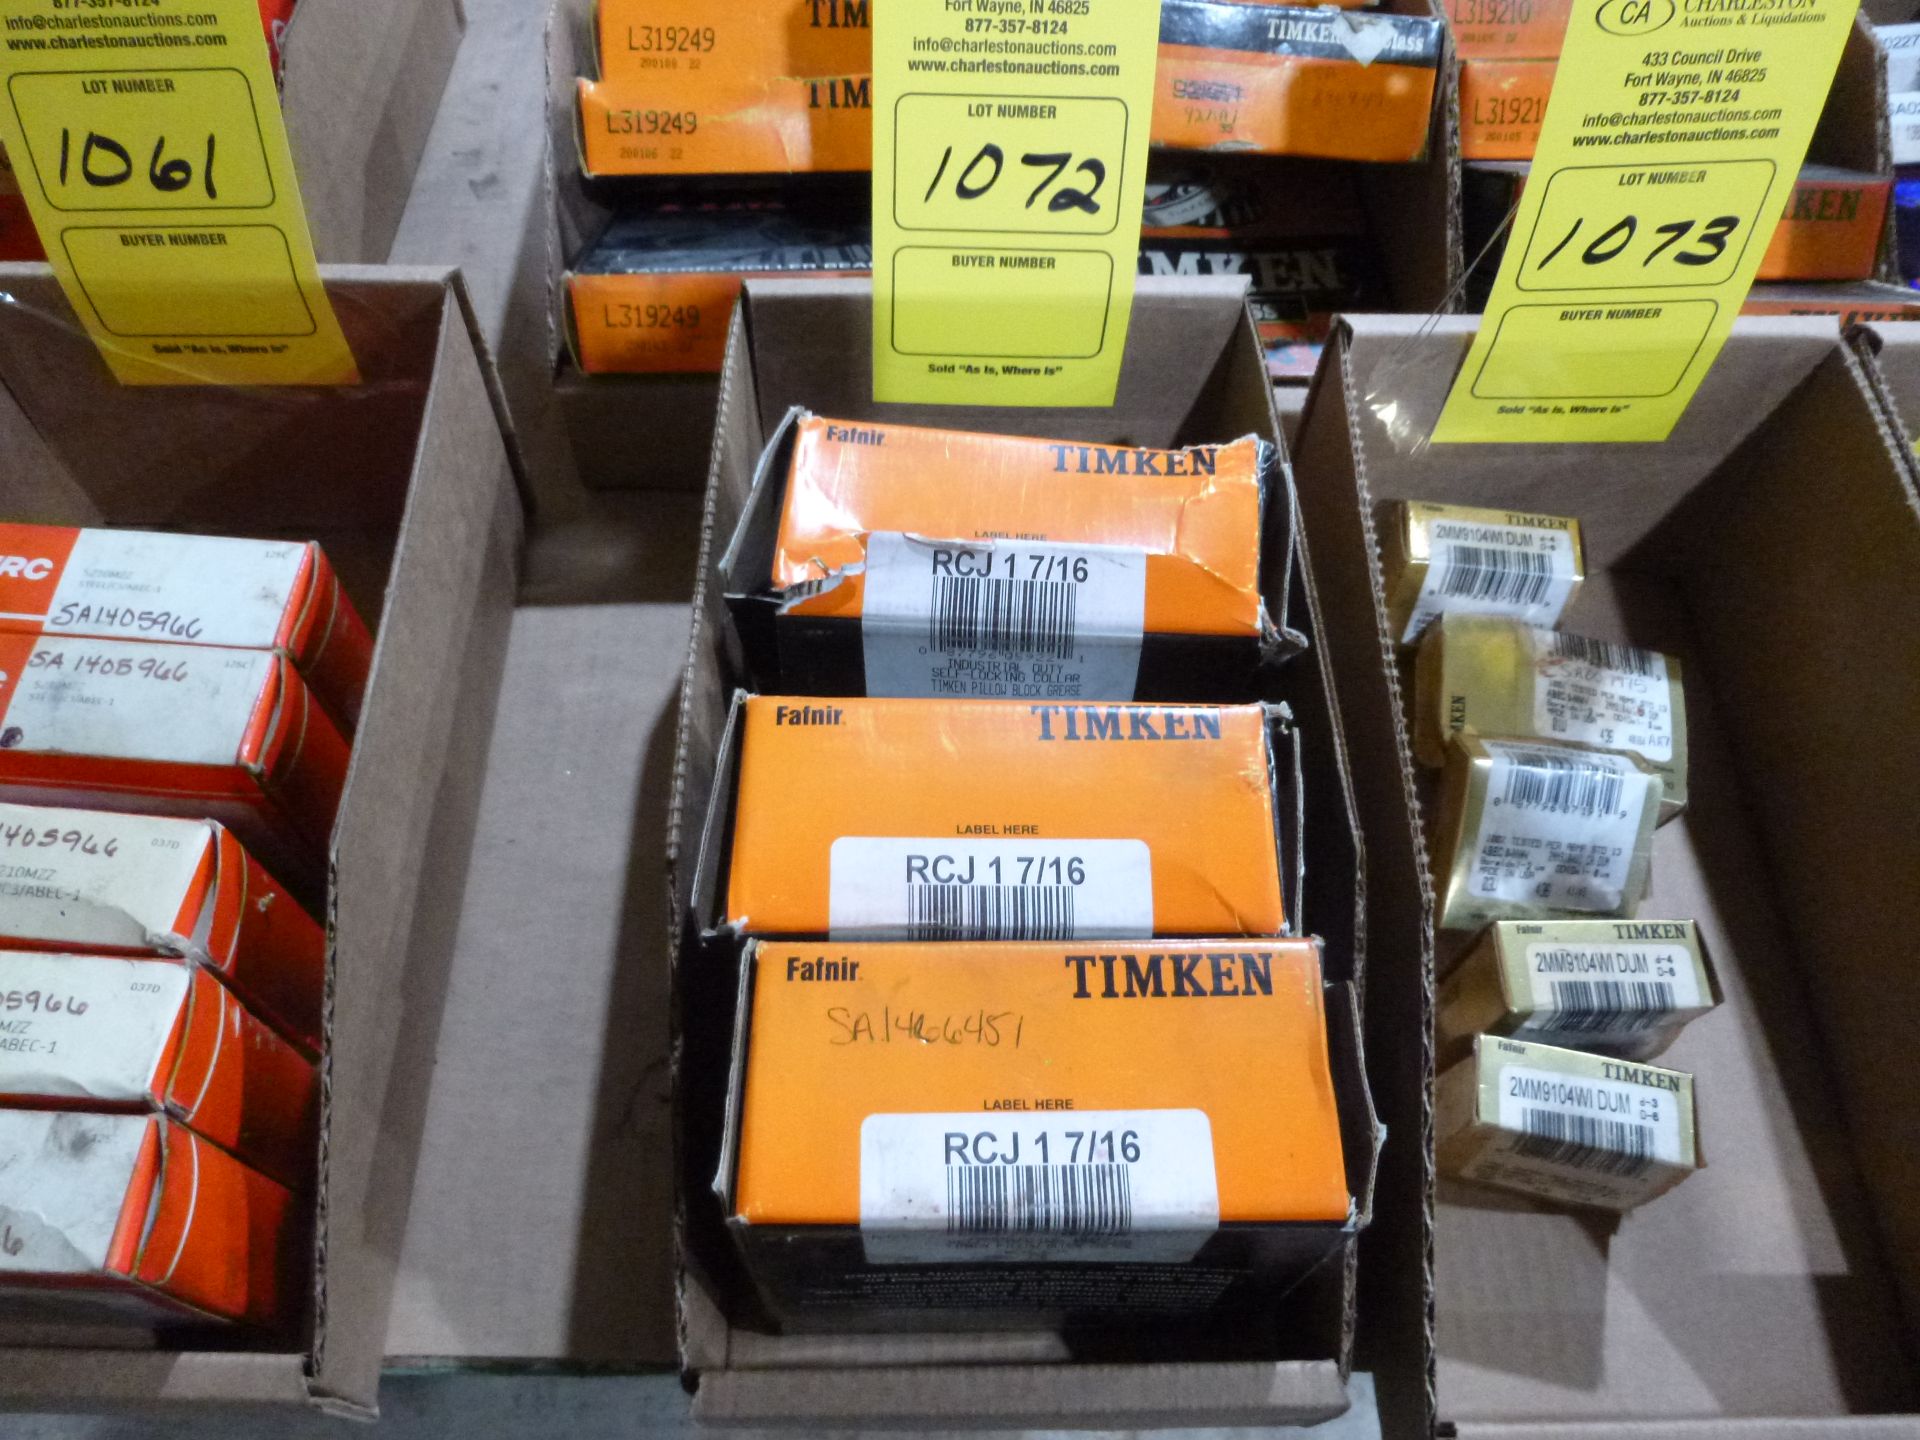 Qty 3 Timken bearing RCJ1 7/16, as always with Brolyn LLC auctions, all lots can be picked up from